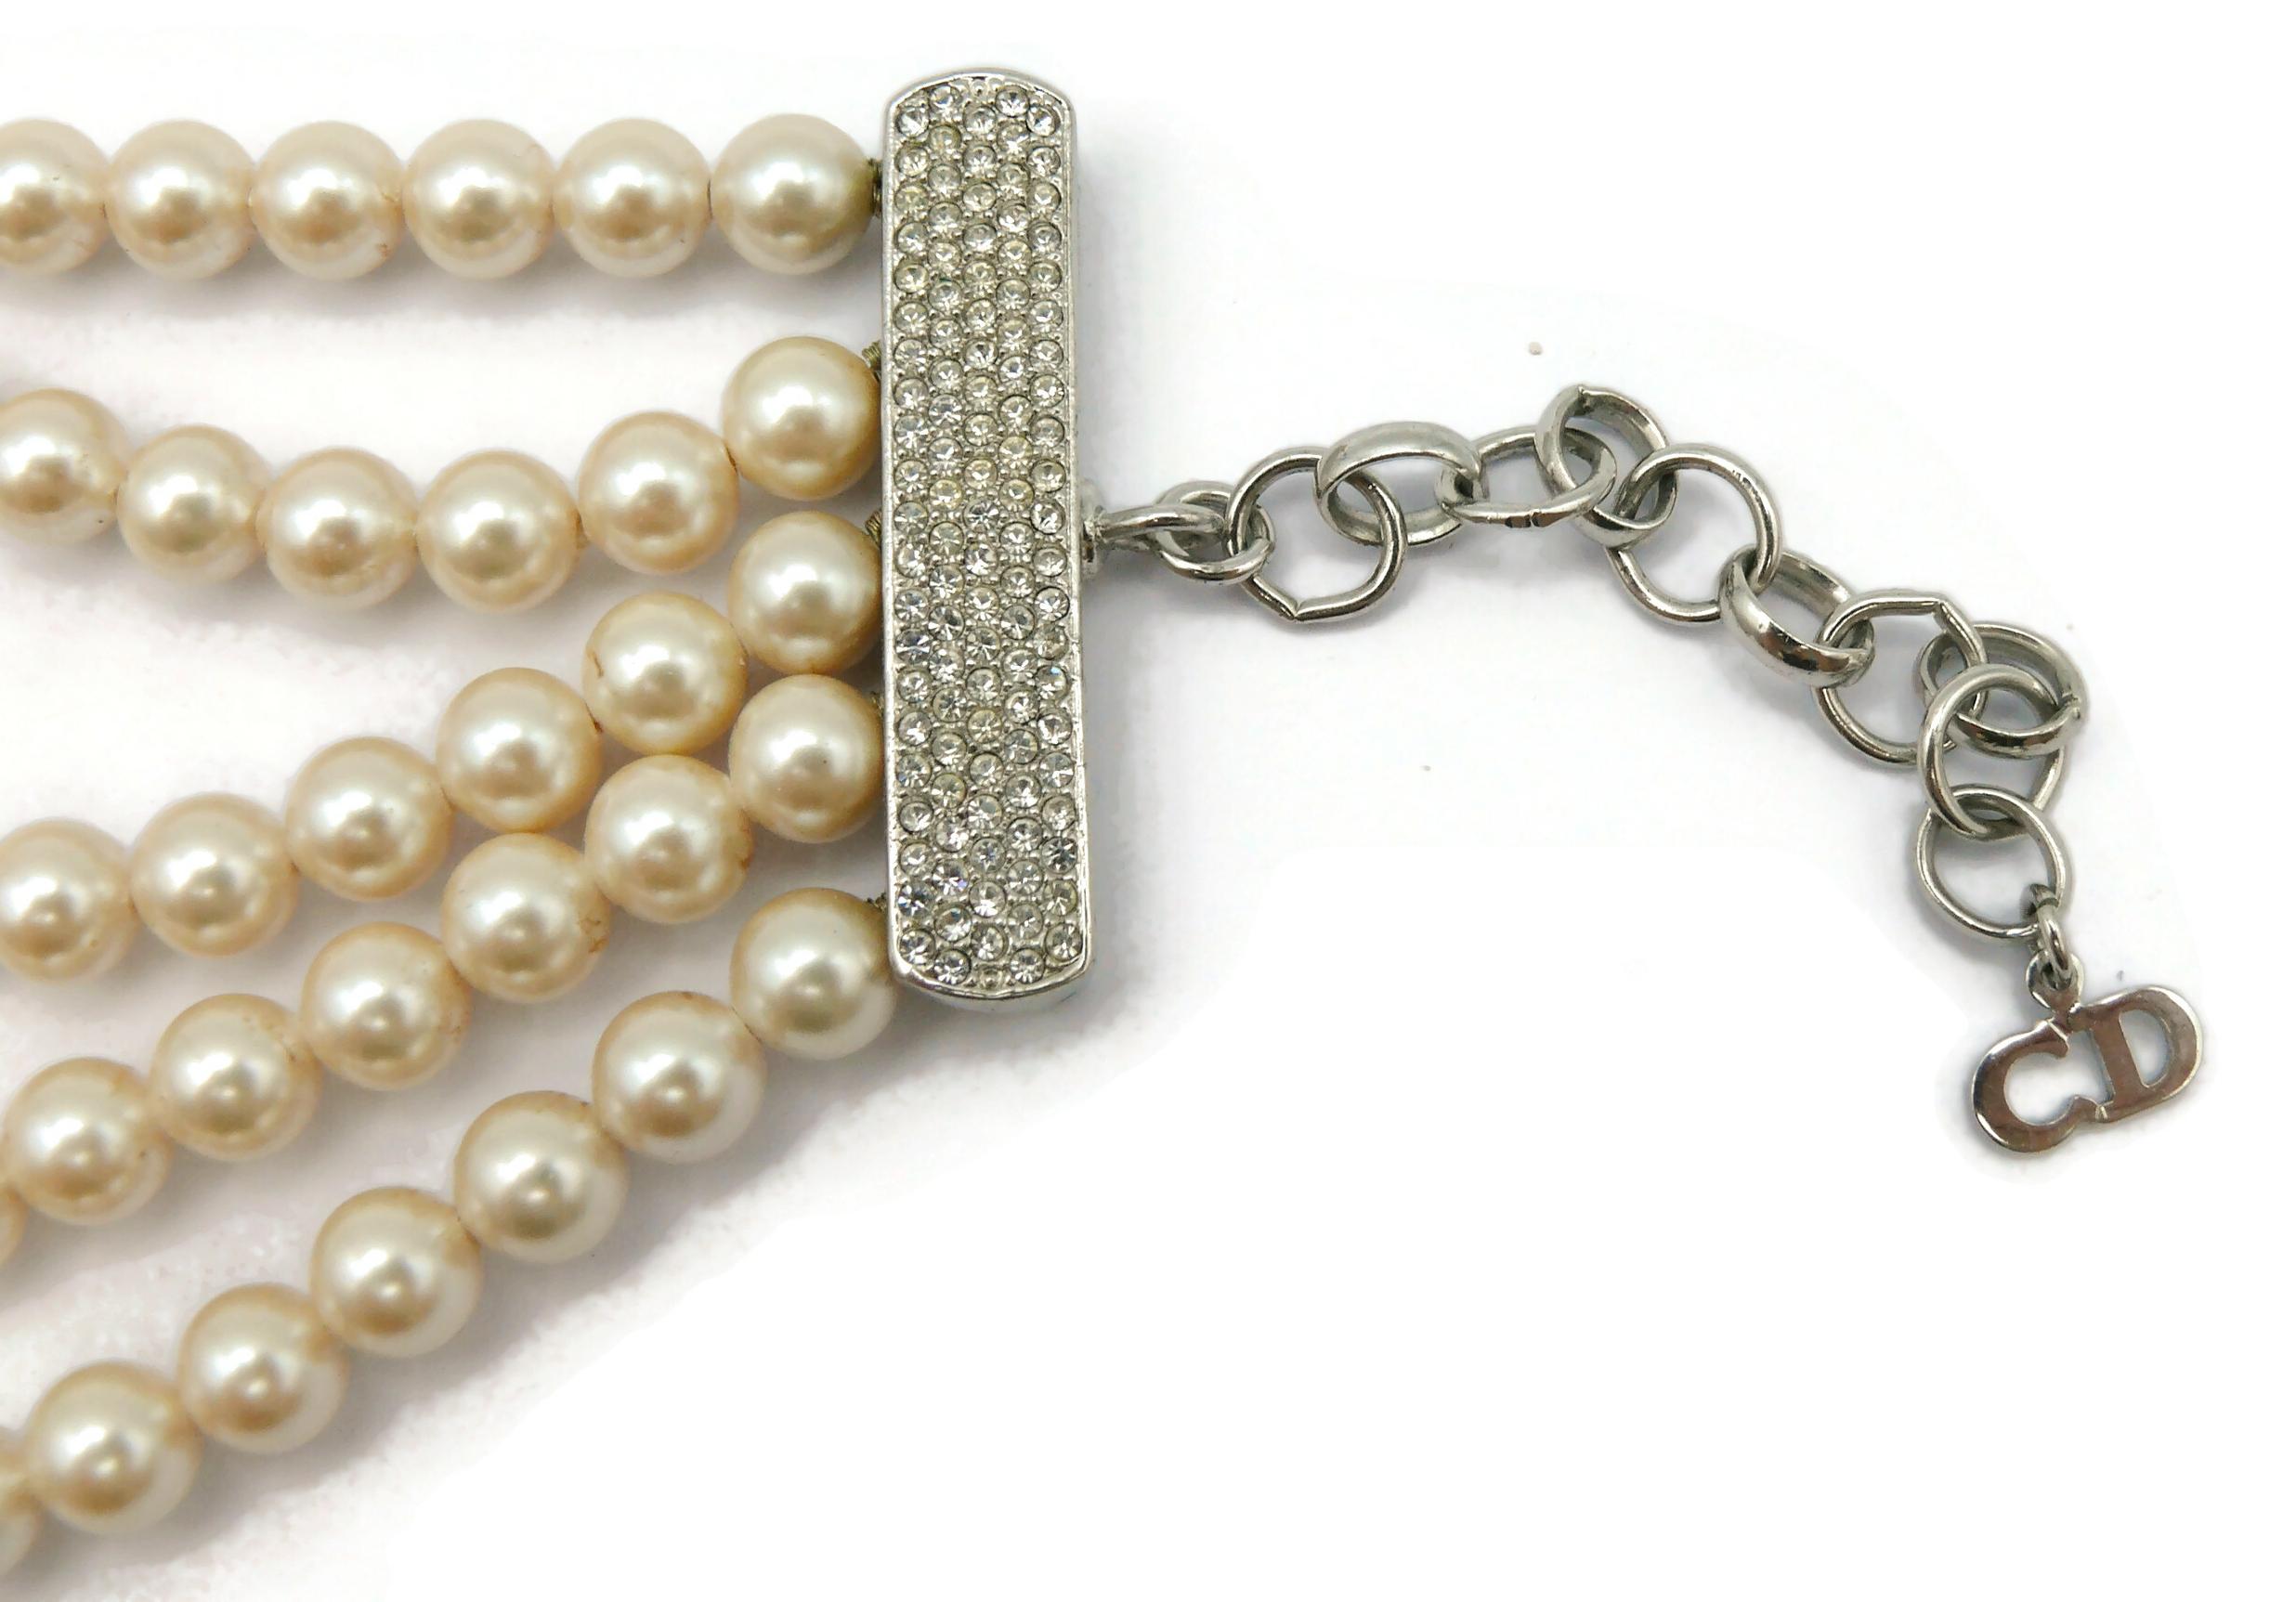 CHRISTIAN DIOR Vintage Multi-Strand Faux Pearl Necklace For Sale 4